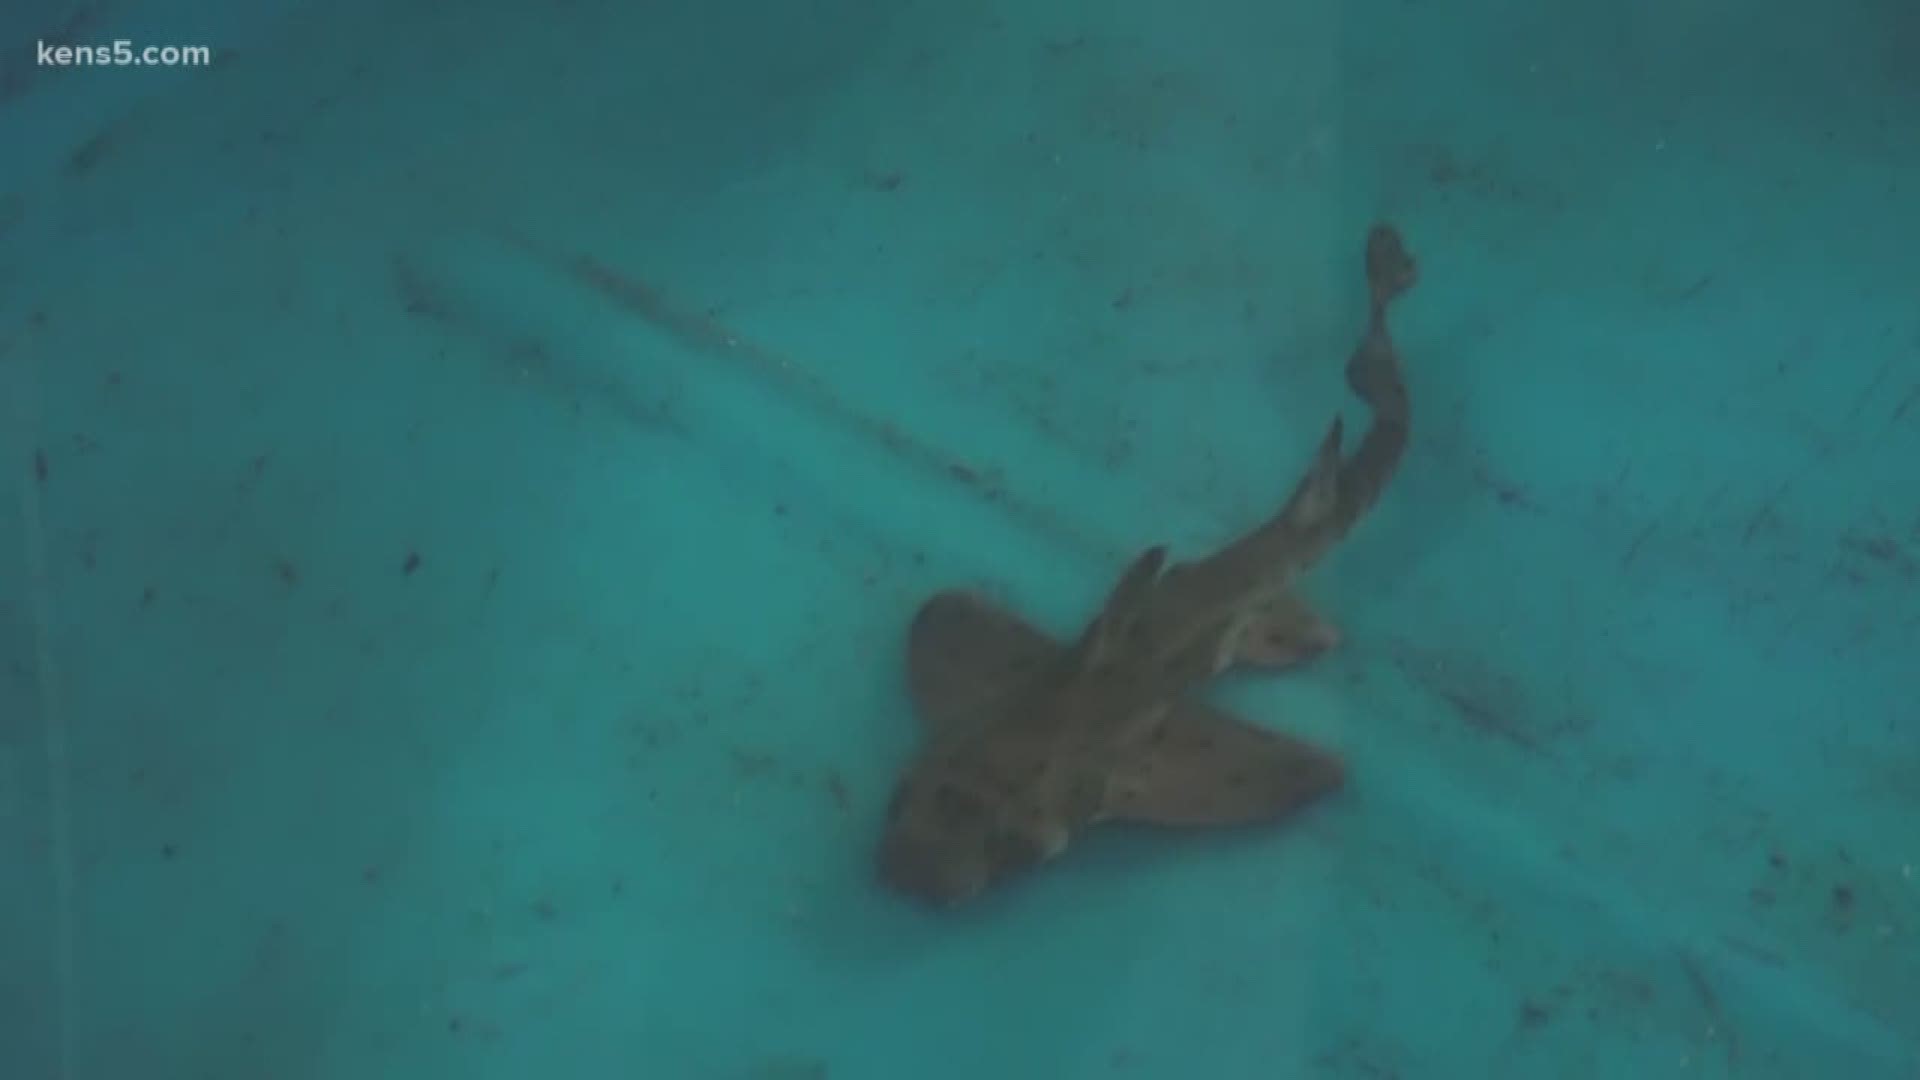 The San Antonio Aquarium says the horn shark "Miss Helen" is still not eating after a man stole the shark on Saturday.